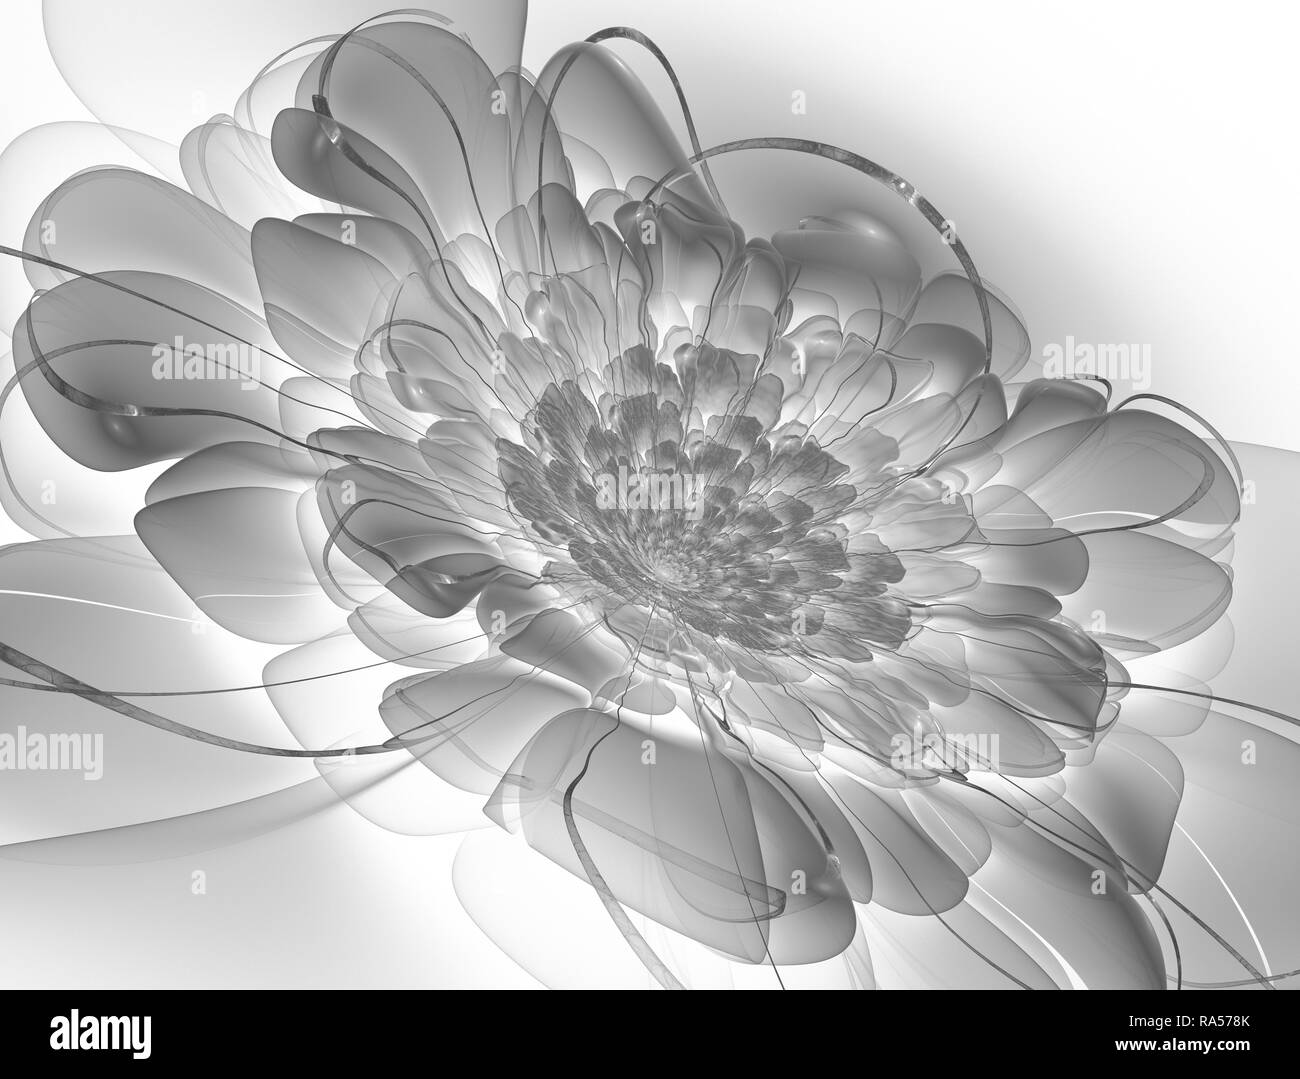 Magic night fantasy. Abstract exotic fractal background, spiral flower with glowing core with textured petals. Design for posters, t-shirts, creative  Stock Photo